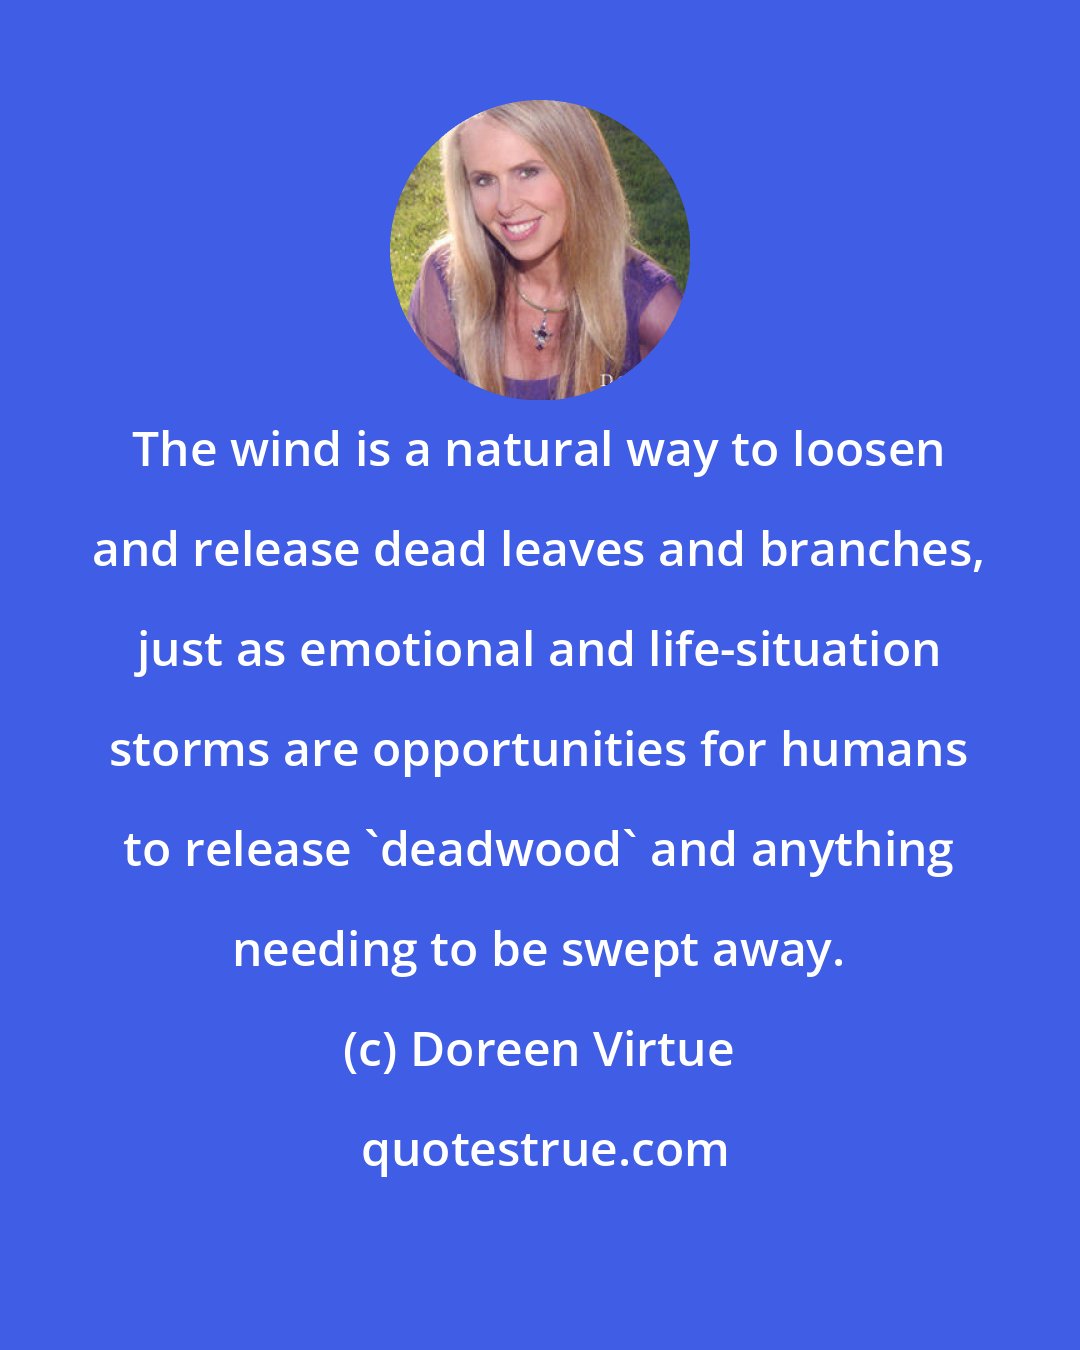 Doreen Virtue: The wind is a natural way to loosen and release dead leaves and branches, just as emotional and life-situation storms are opportunities for humans to release 'deadwood' and anything needing to be swept away.